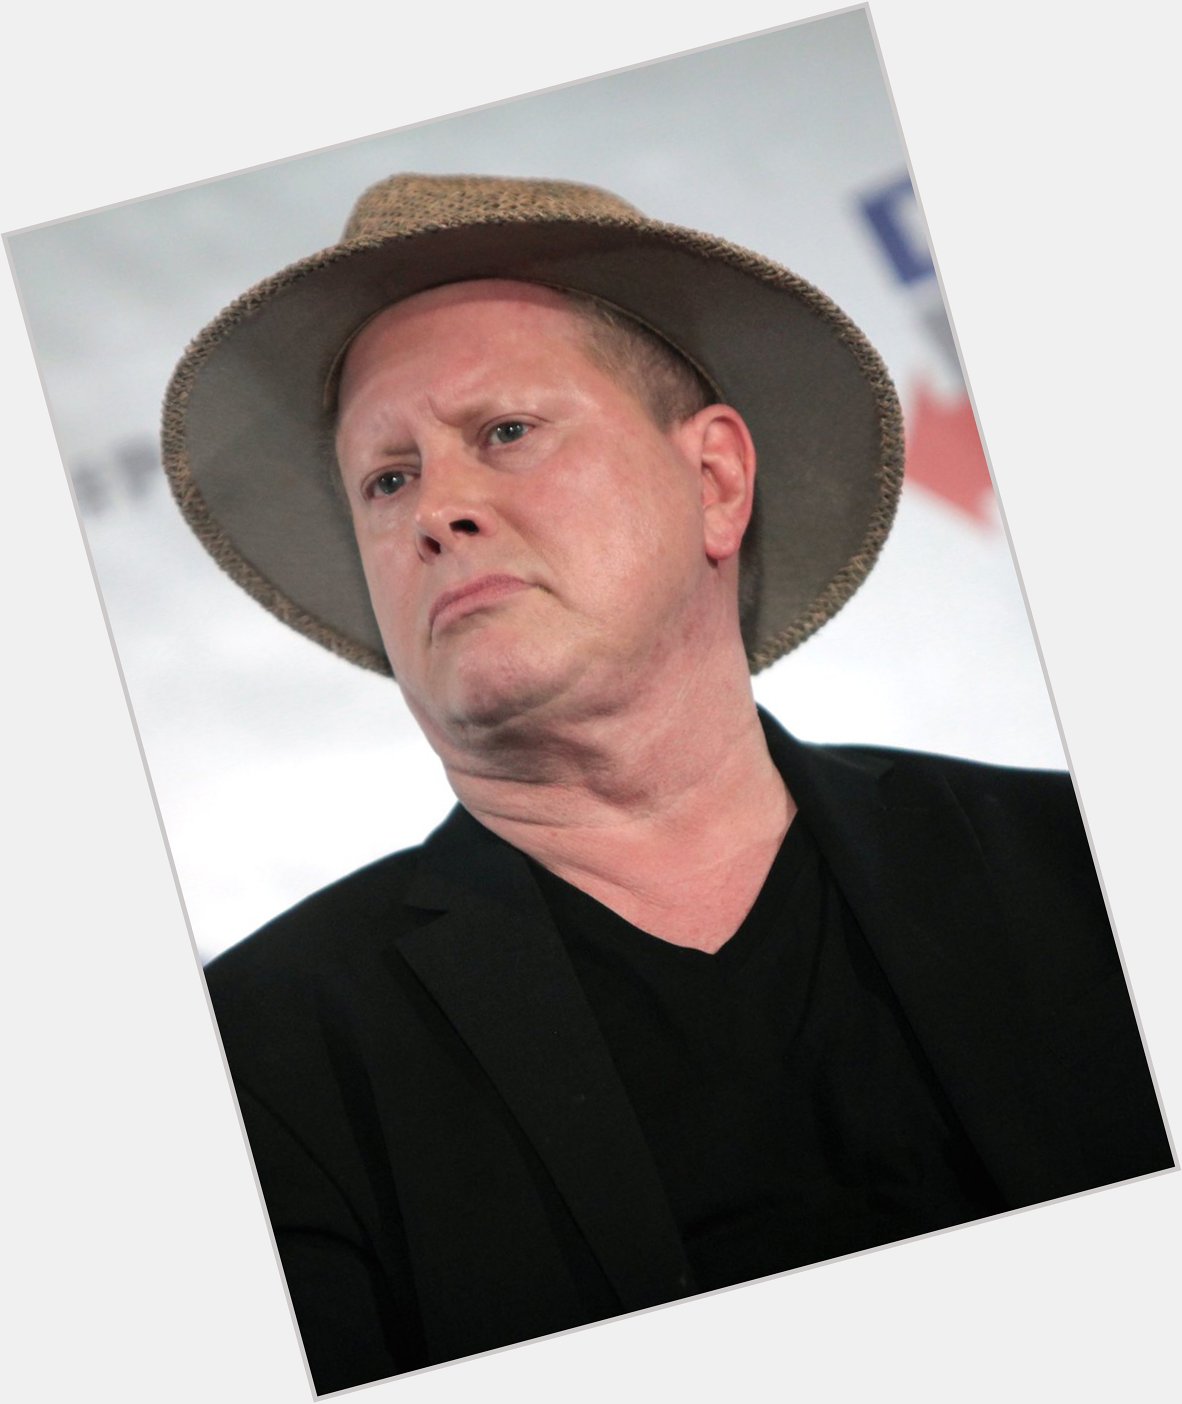 Happy Birthday to actor, comedian and impressionist Darrell Hammond born on October 8, 1955 